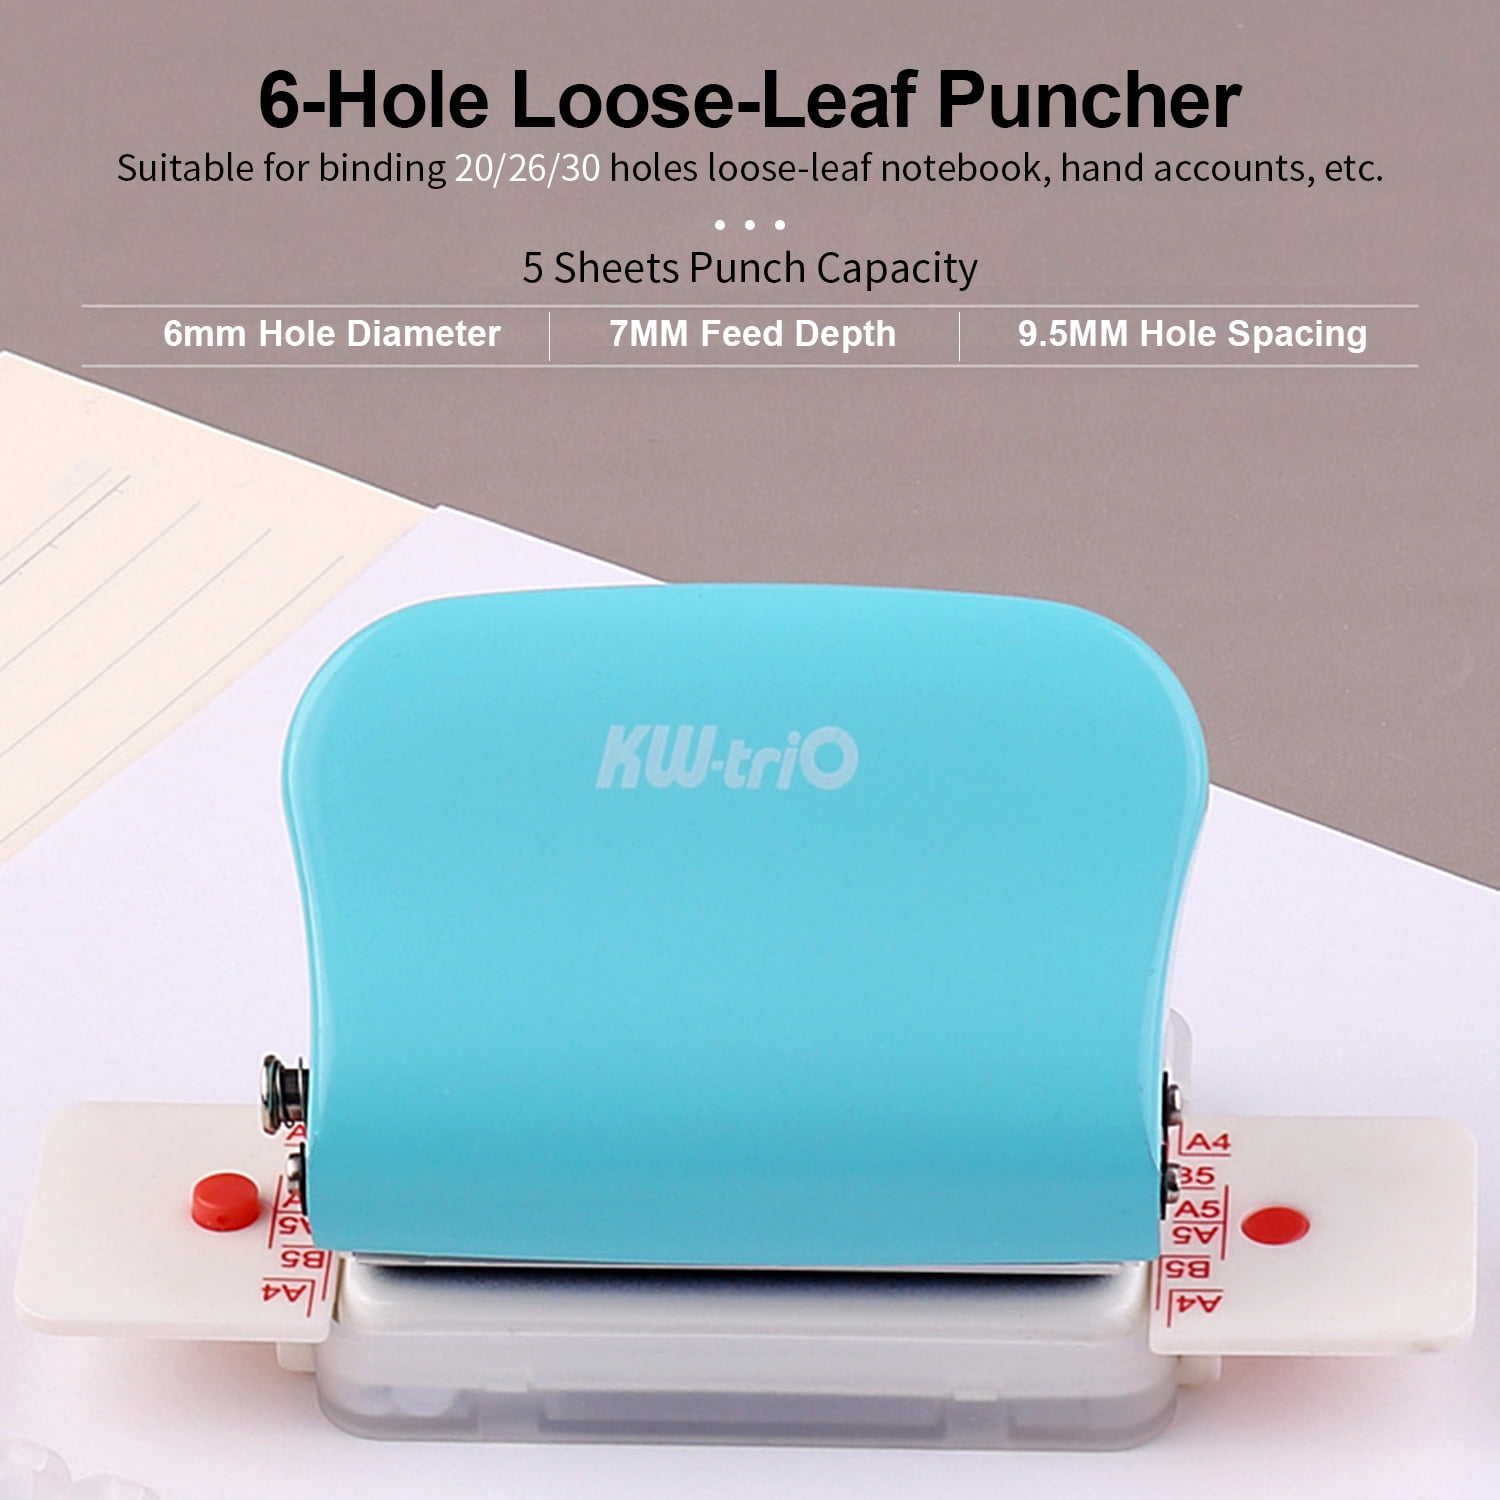 Kw-trio 6-Hole Paper Punch Handheld Metal Hole Puncher 5 Sheet Capacity 6mm for A4 A5 B5 Notebook Scrapbook Diary Planner, Size: 11.8, Green